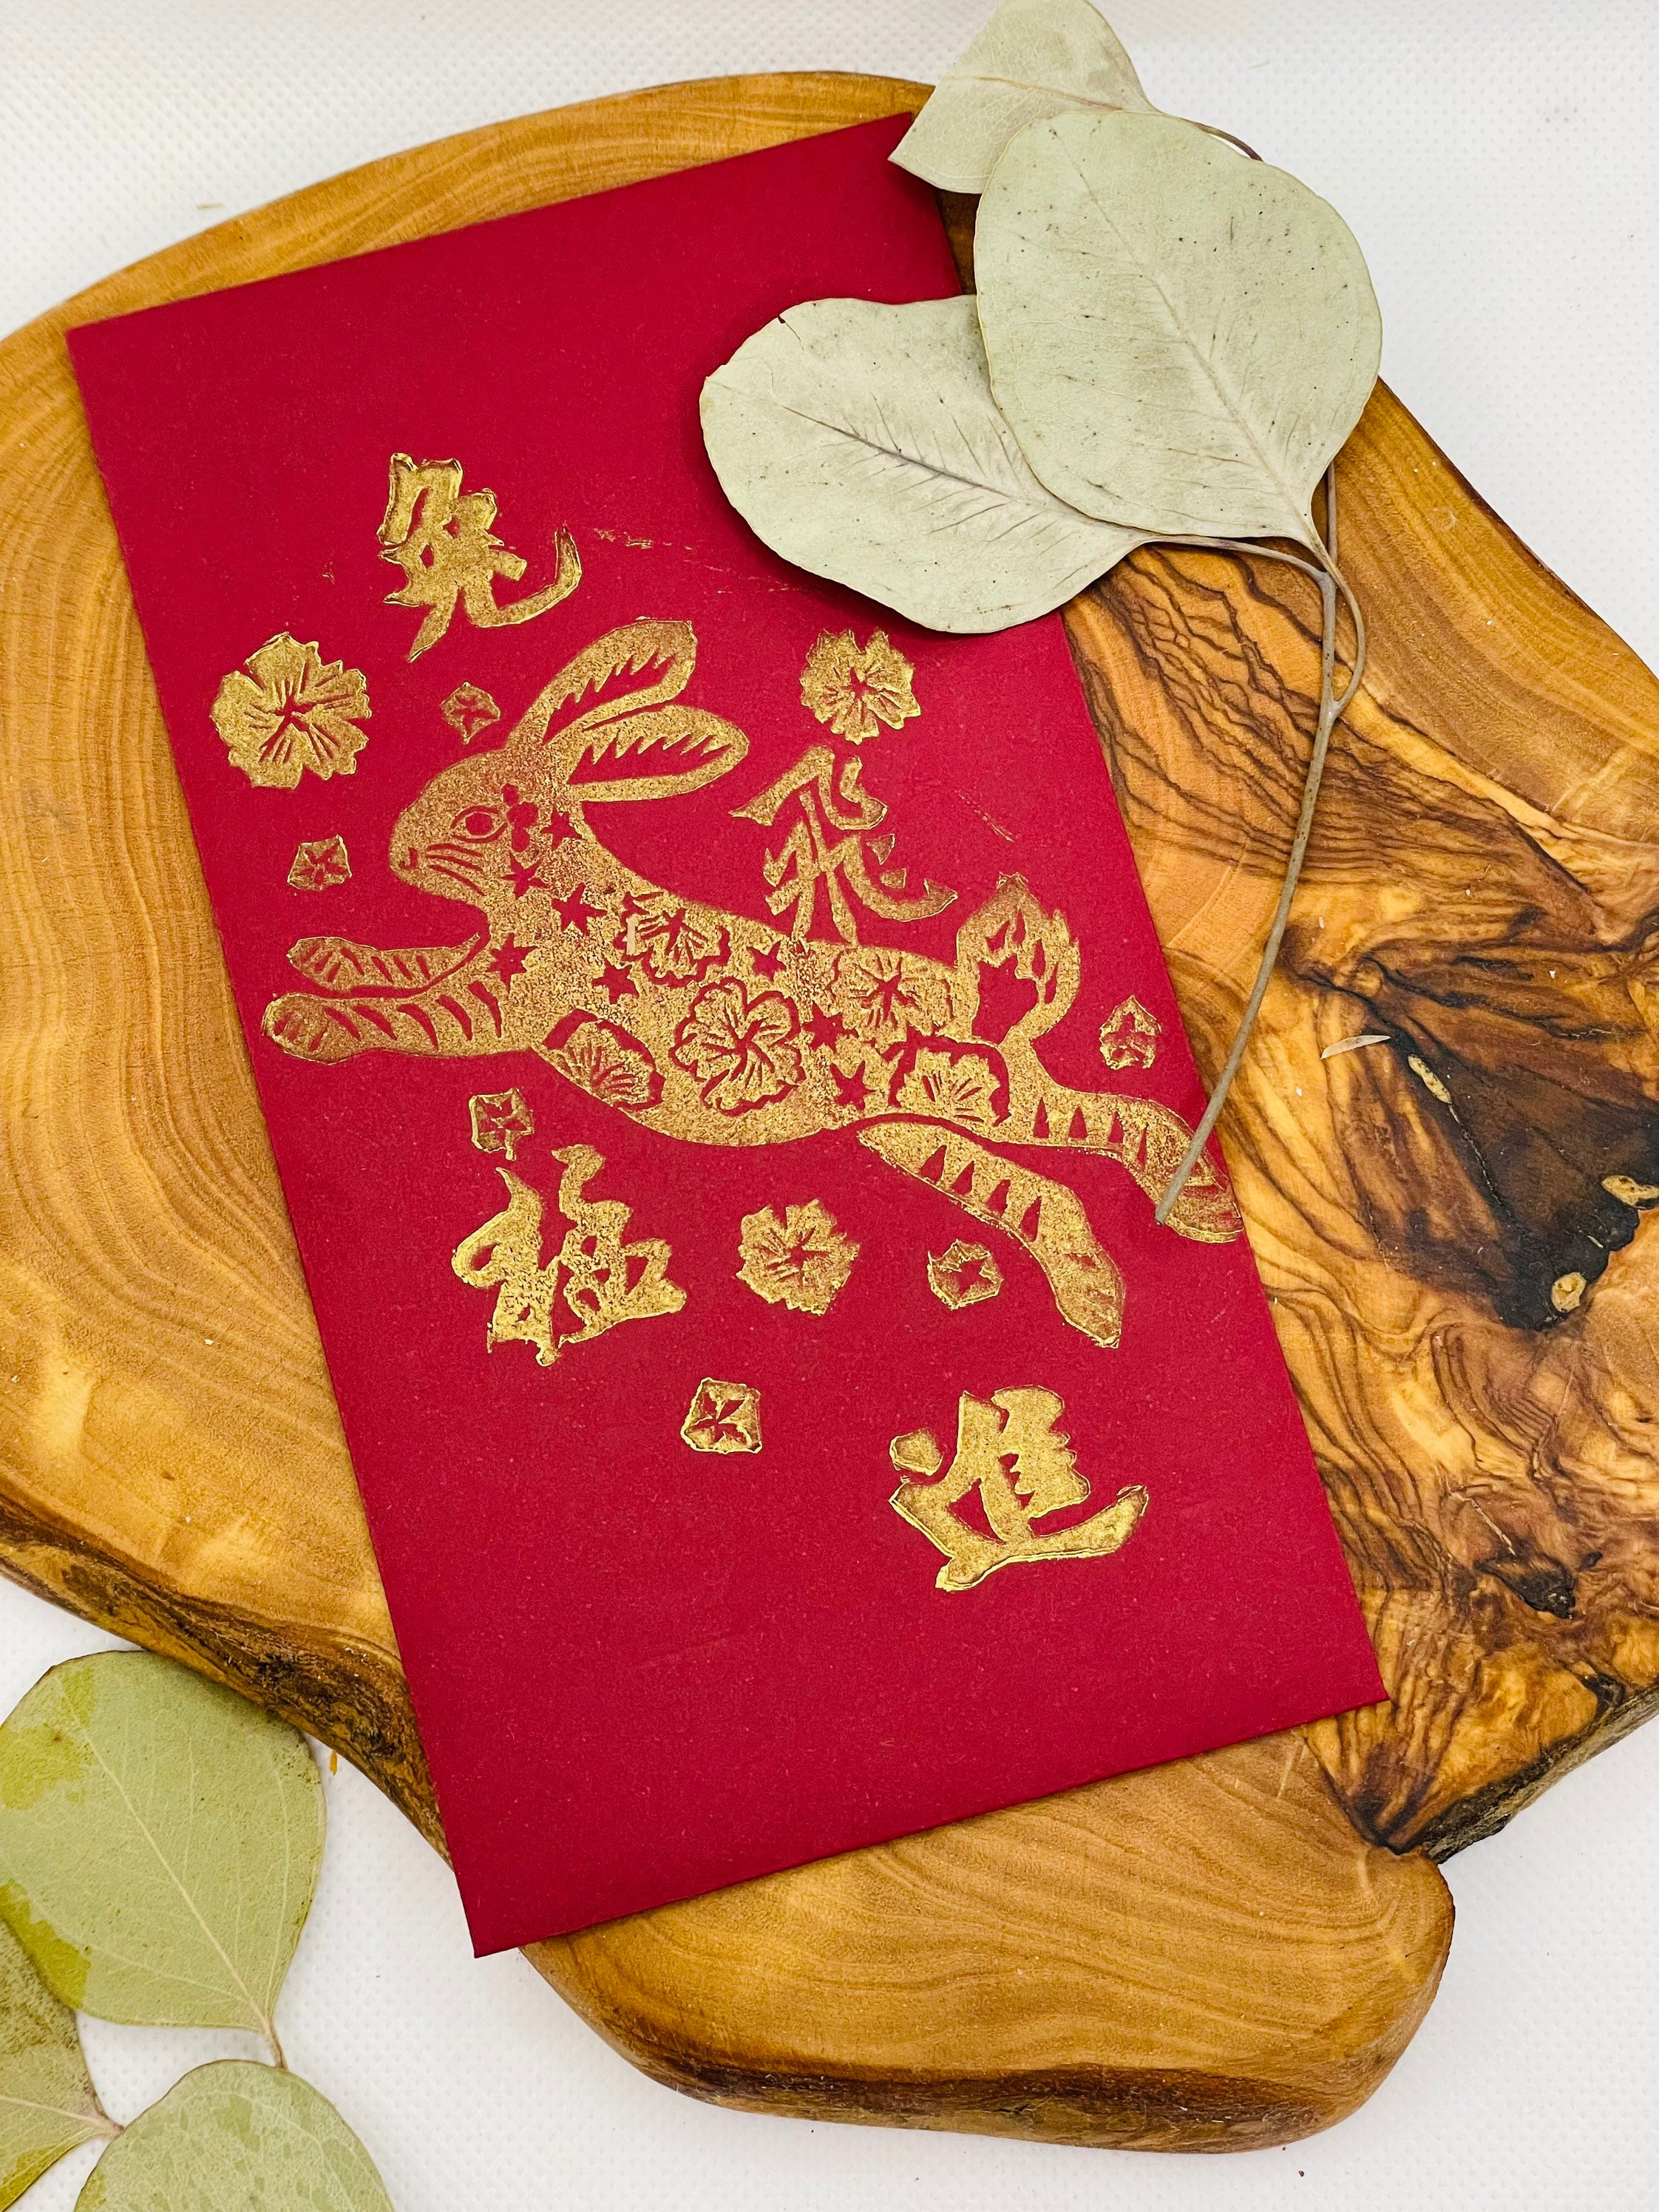 10x Asian Chinese Lunar New Year Year of Rabbit Red Envelopes 